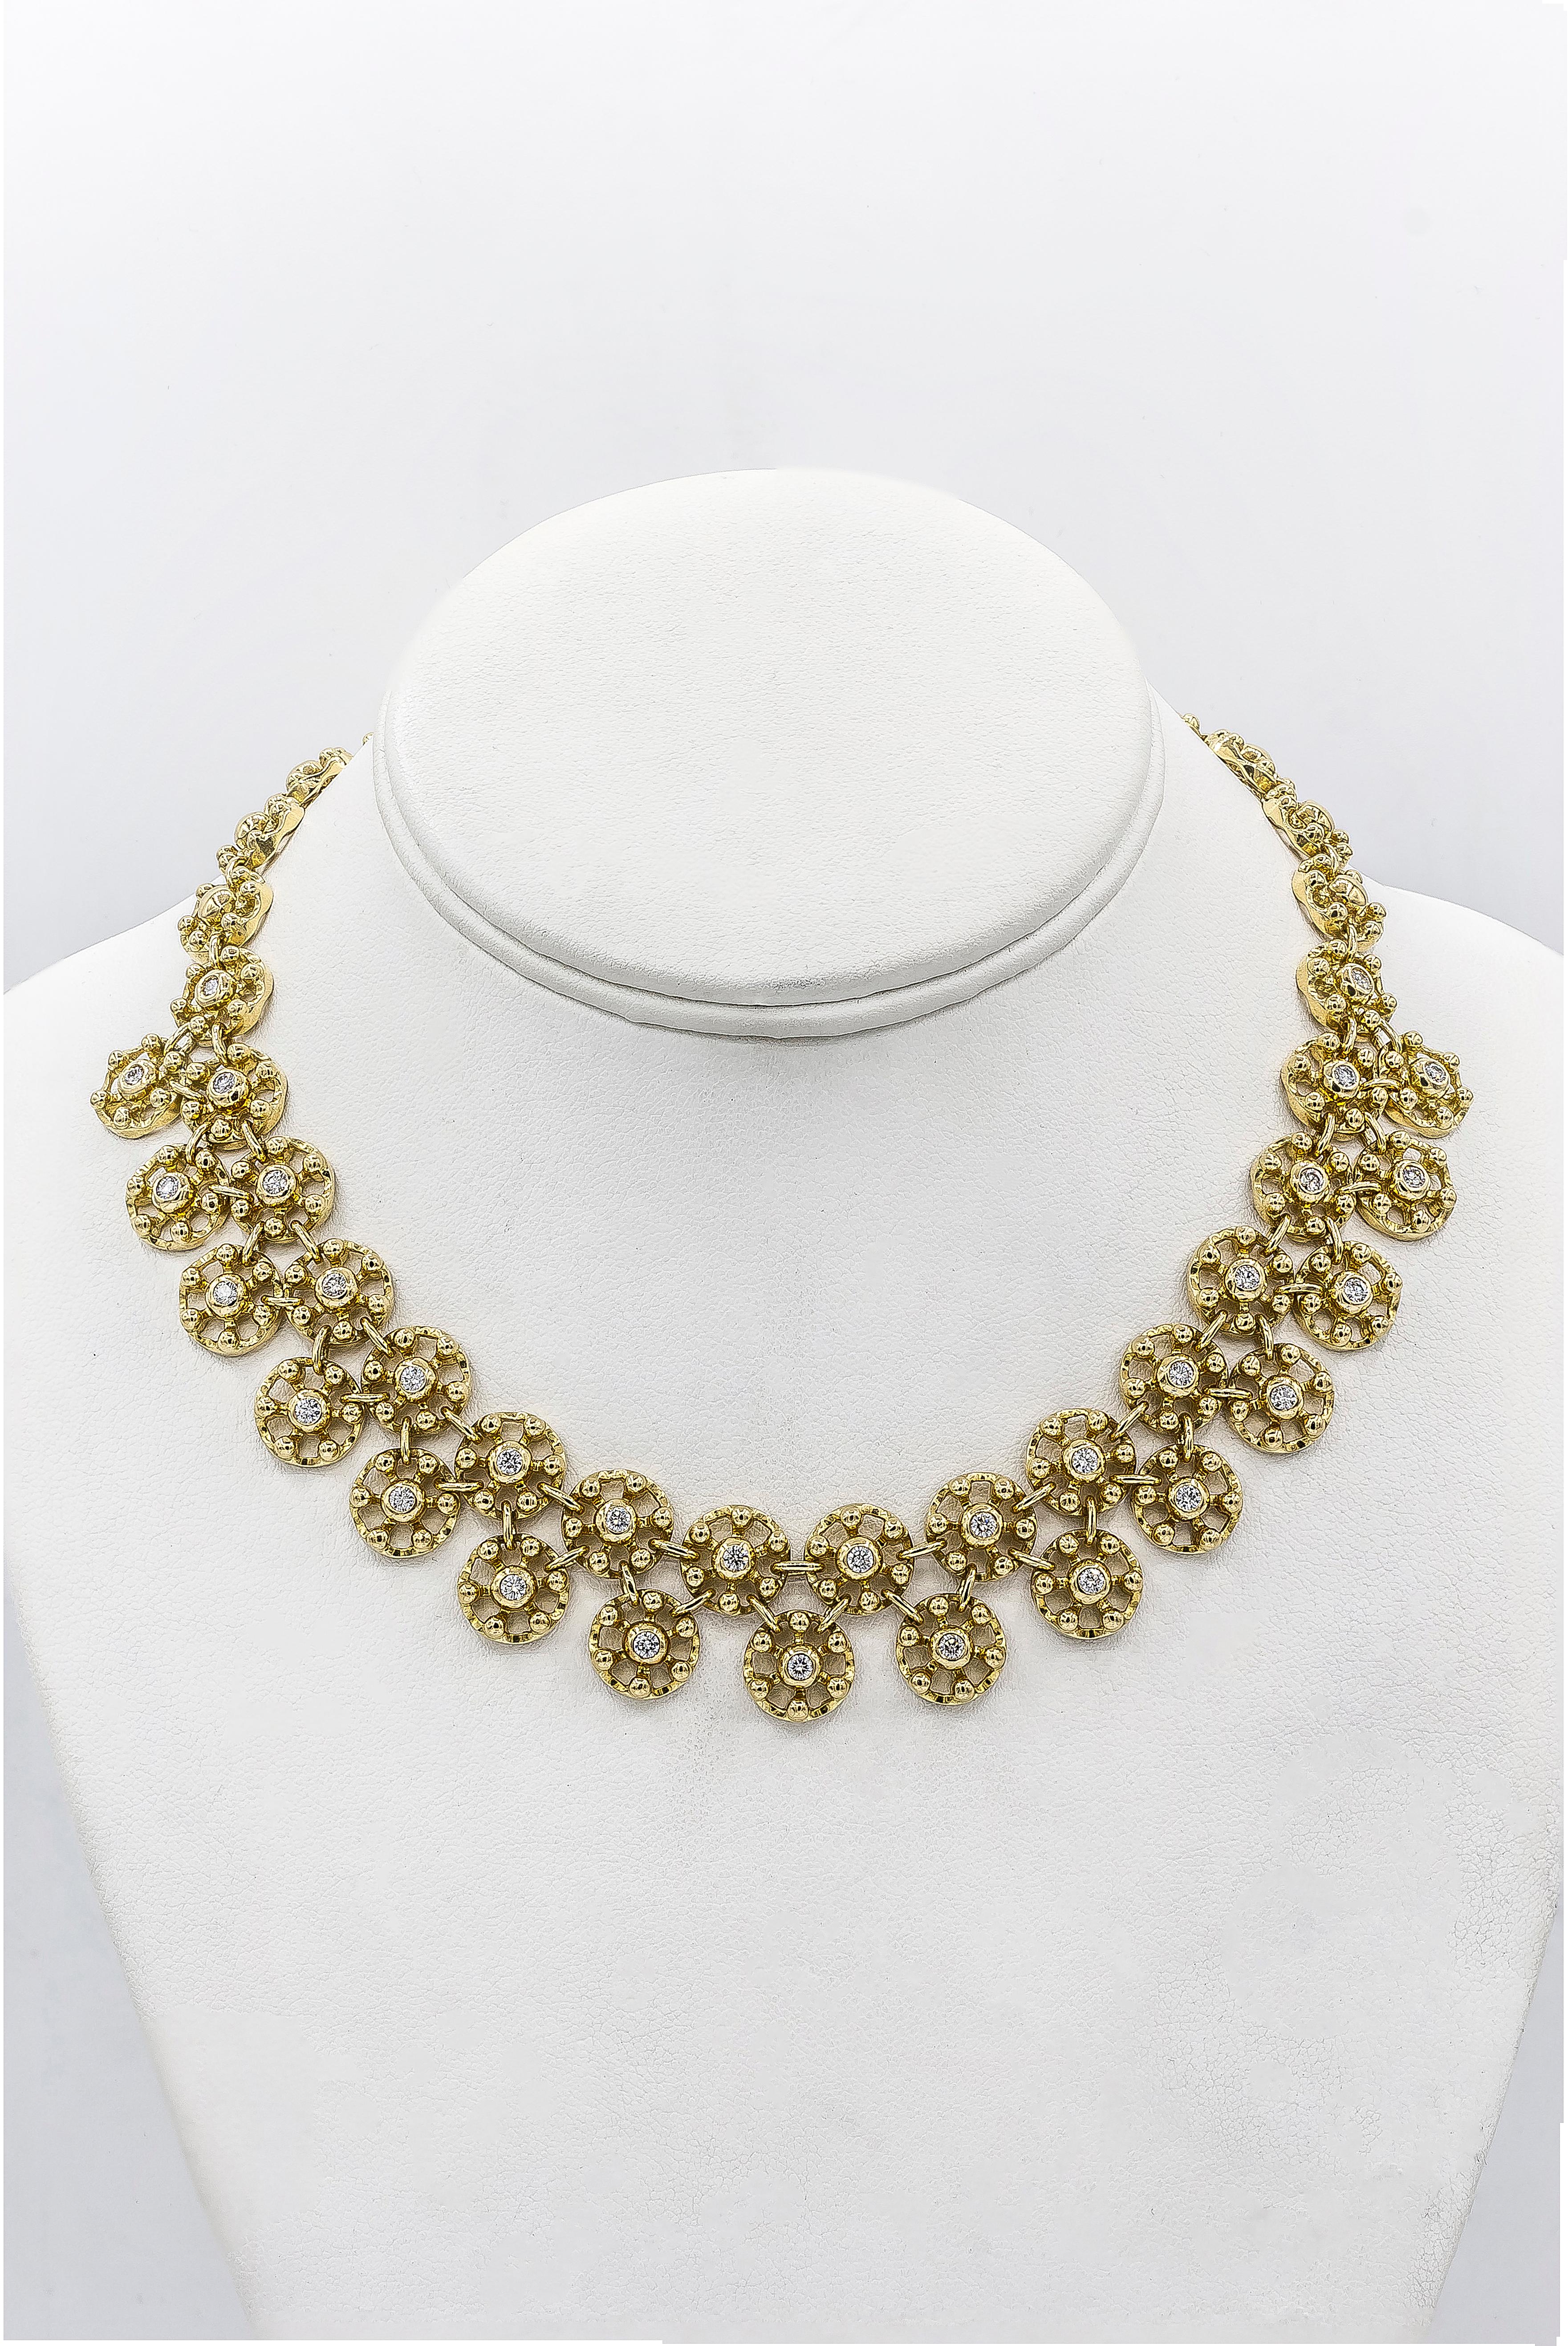 Round Cut 2.17 Carat Round Diamond Open-Work Circle Necklace in Yellow Gold